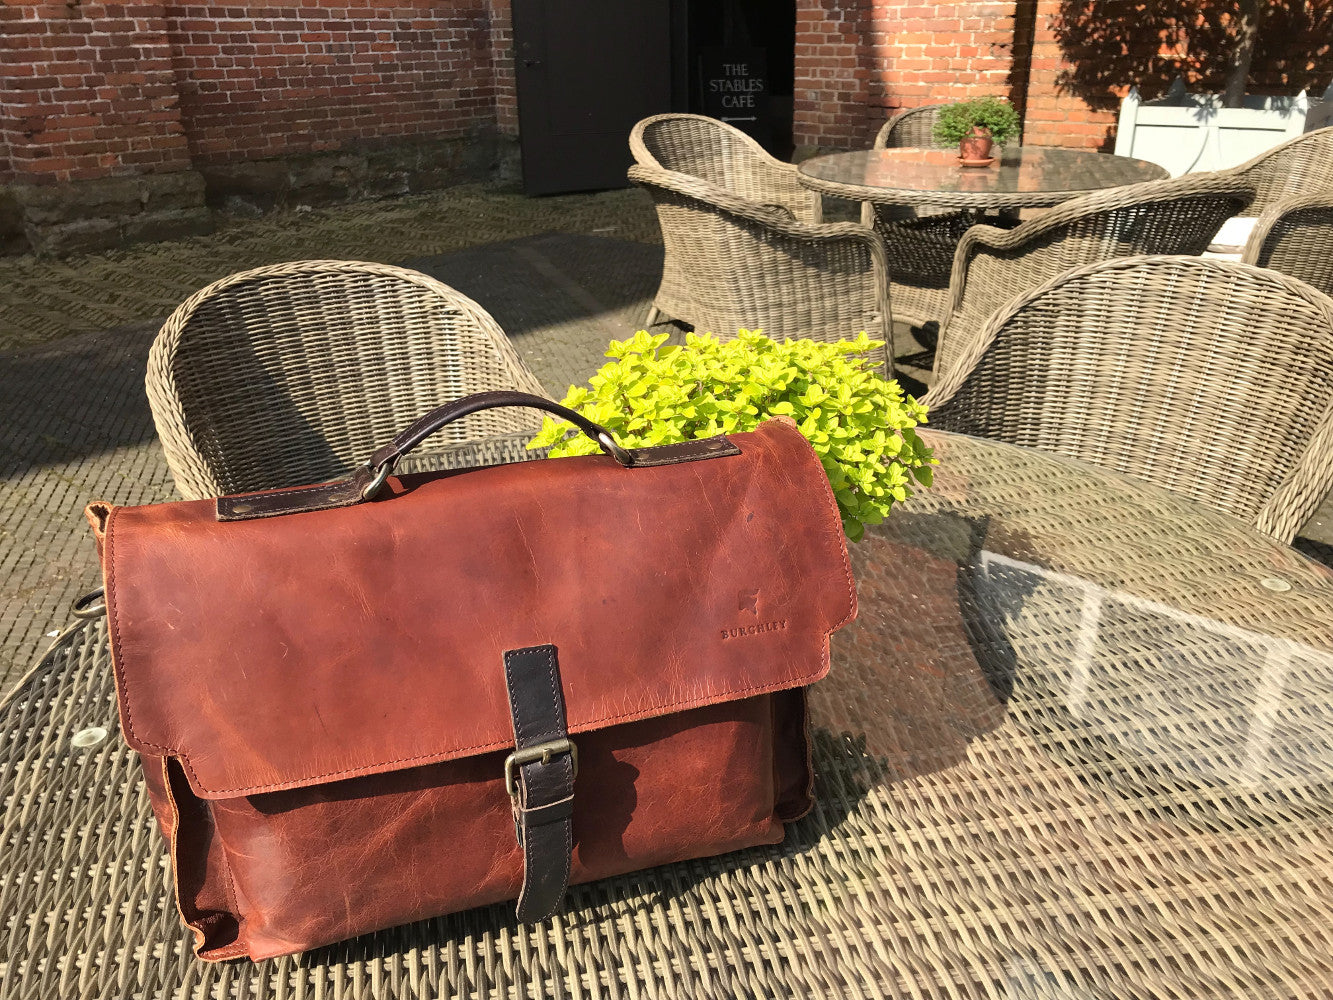 The Dorrington Briefcase. A classic 30's styled leather briefcase by Burghley Bags. A handmade leather vintage work bag, with enough space for 15" laptops. Comes with an adjustable and detachable shoulder strap. Shown in striking dual brown.